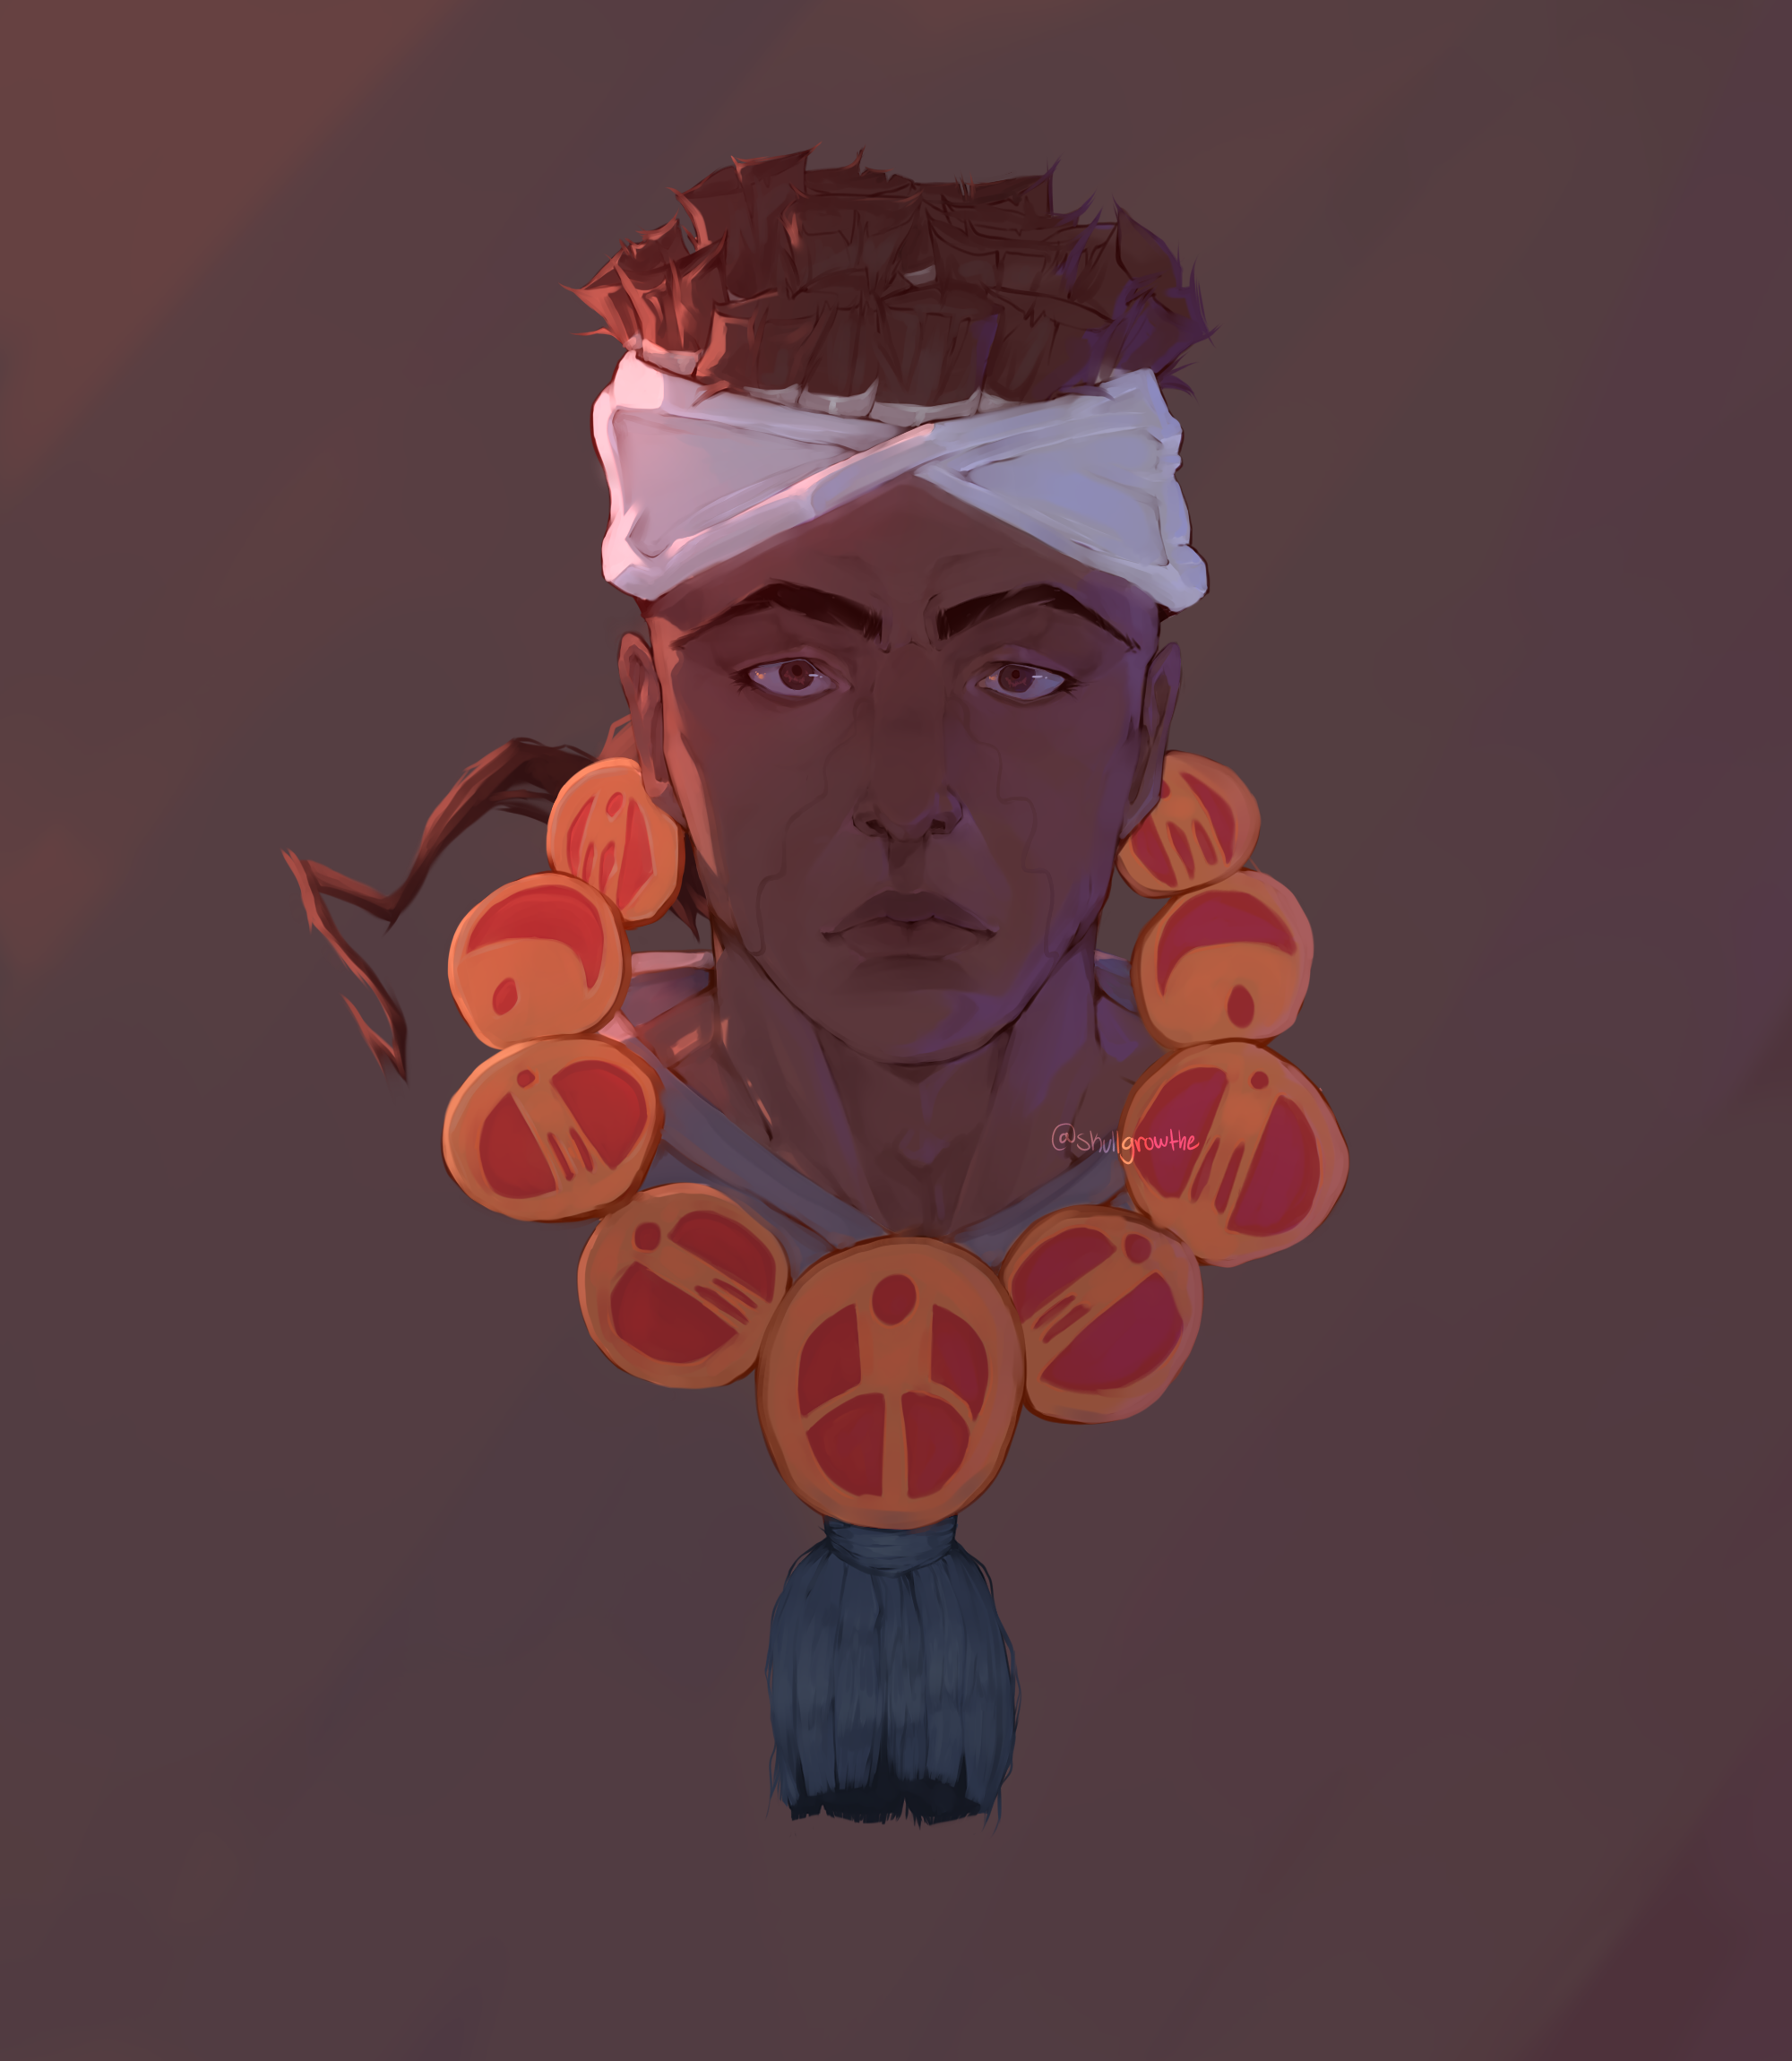 Fanart Decided to try Avdol (Thoughts?)